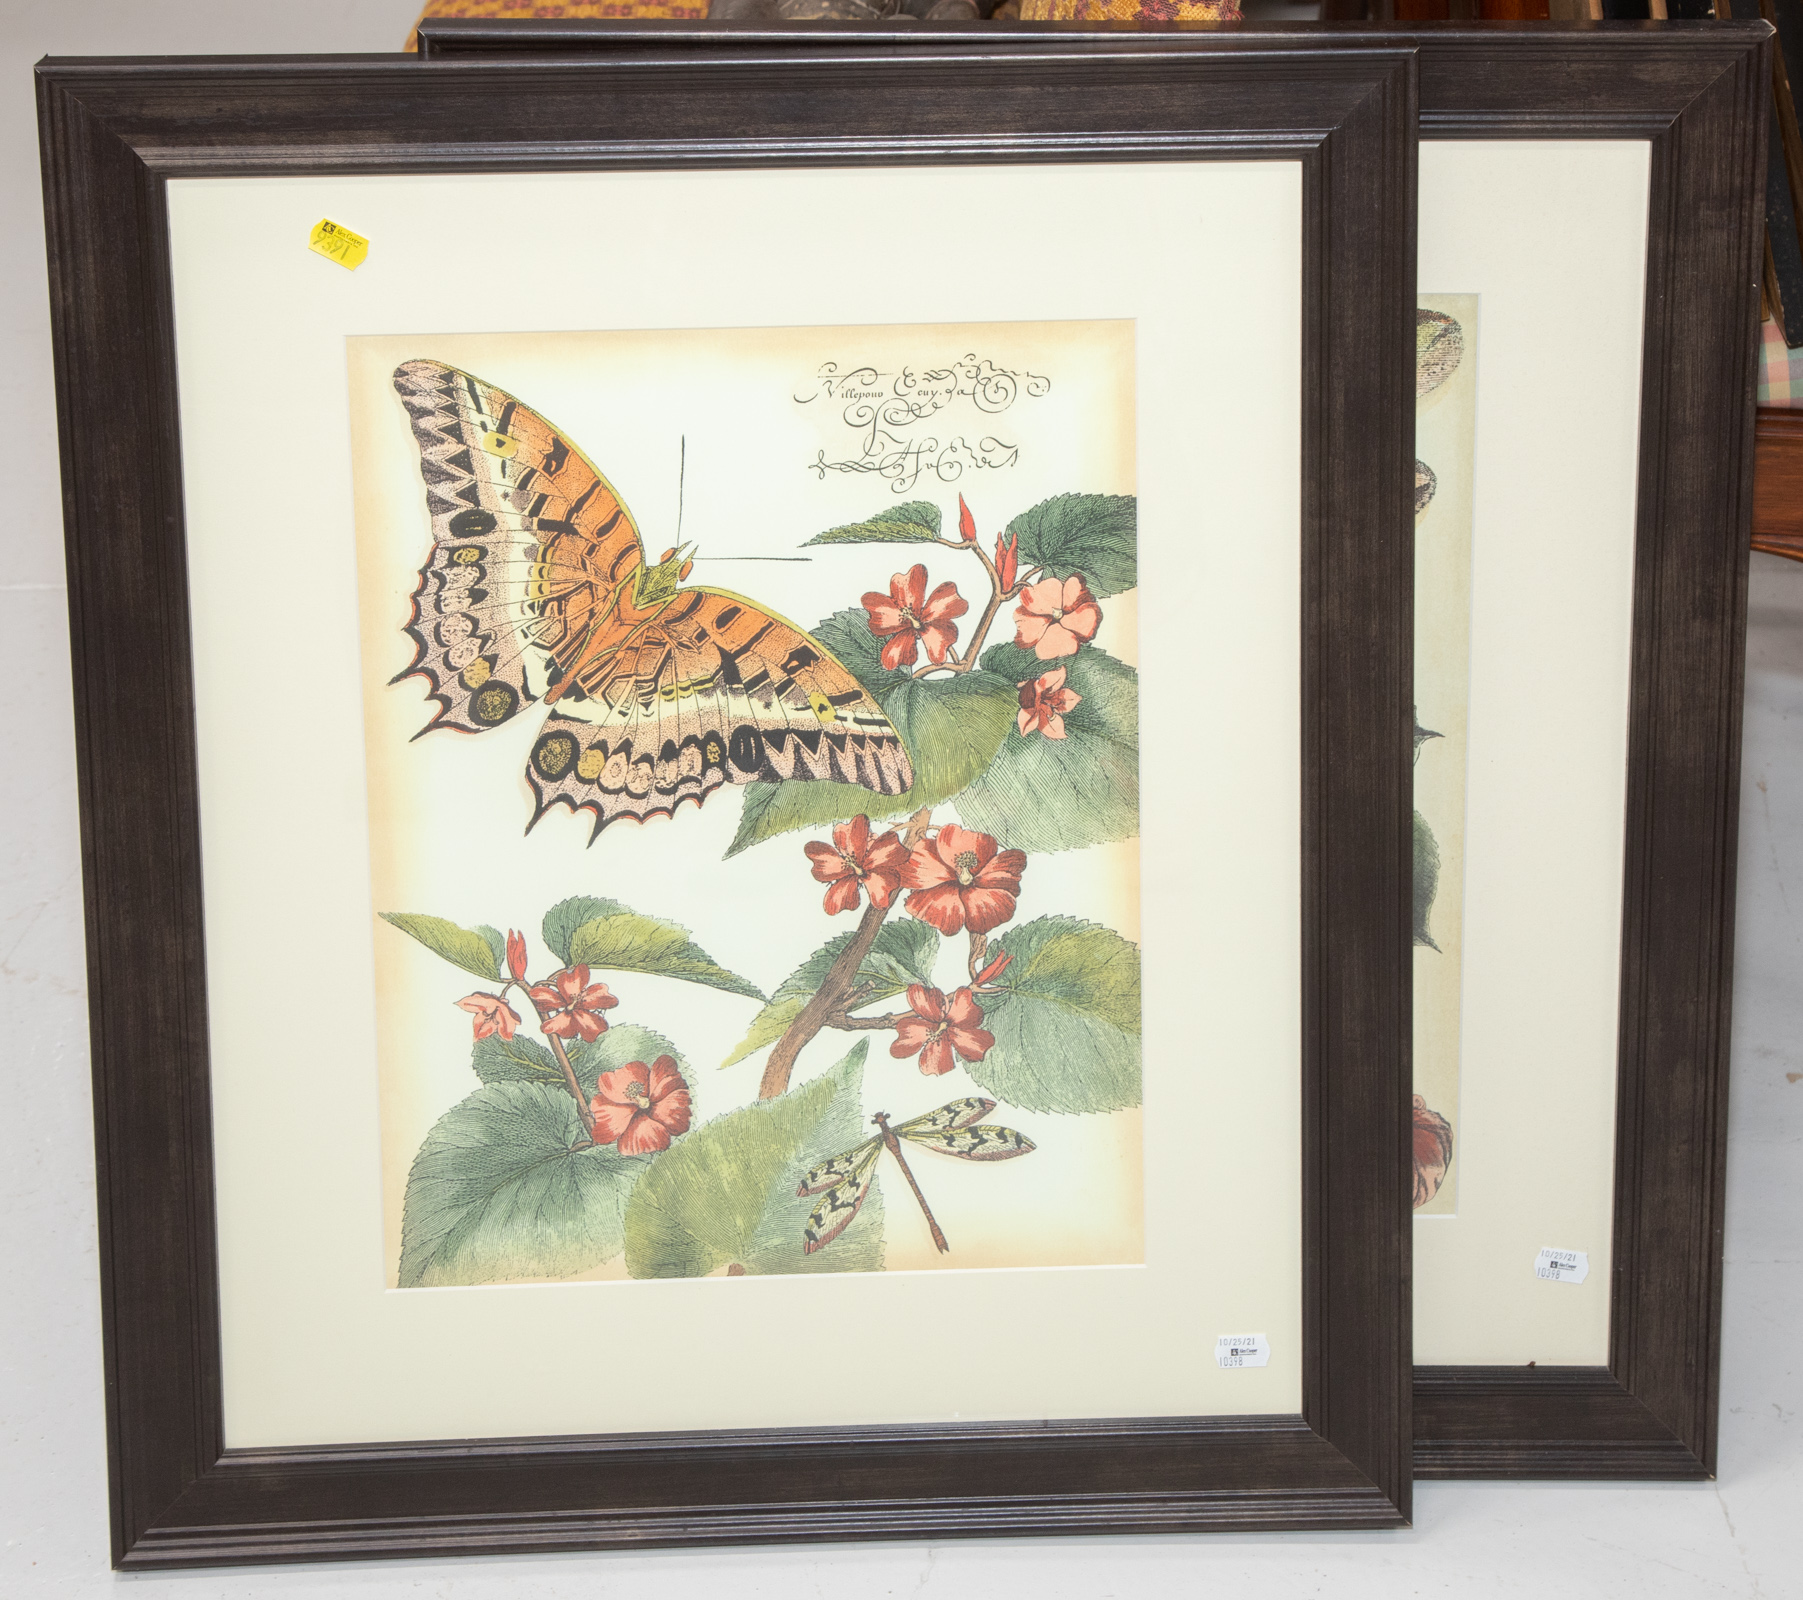 A PAIR OF FRAMED NATURE PRINTS